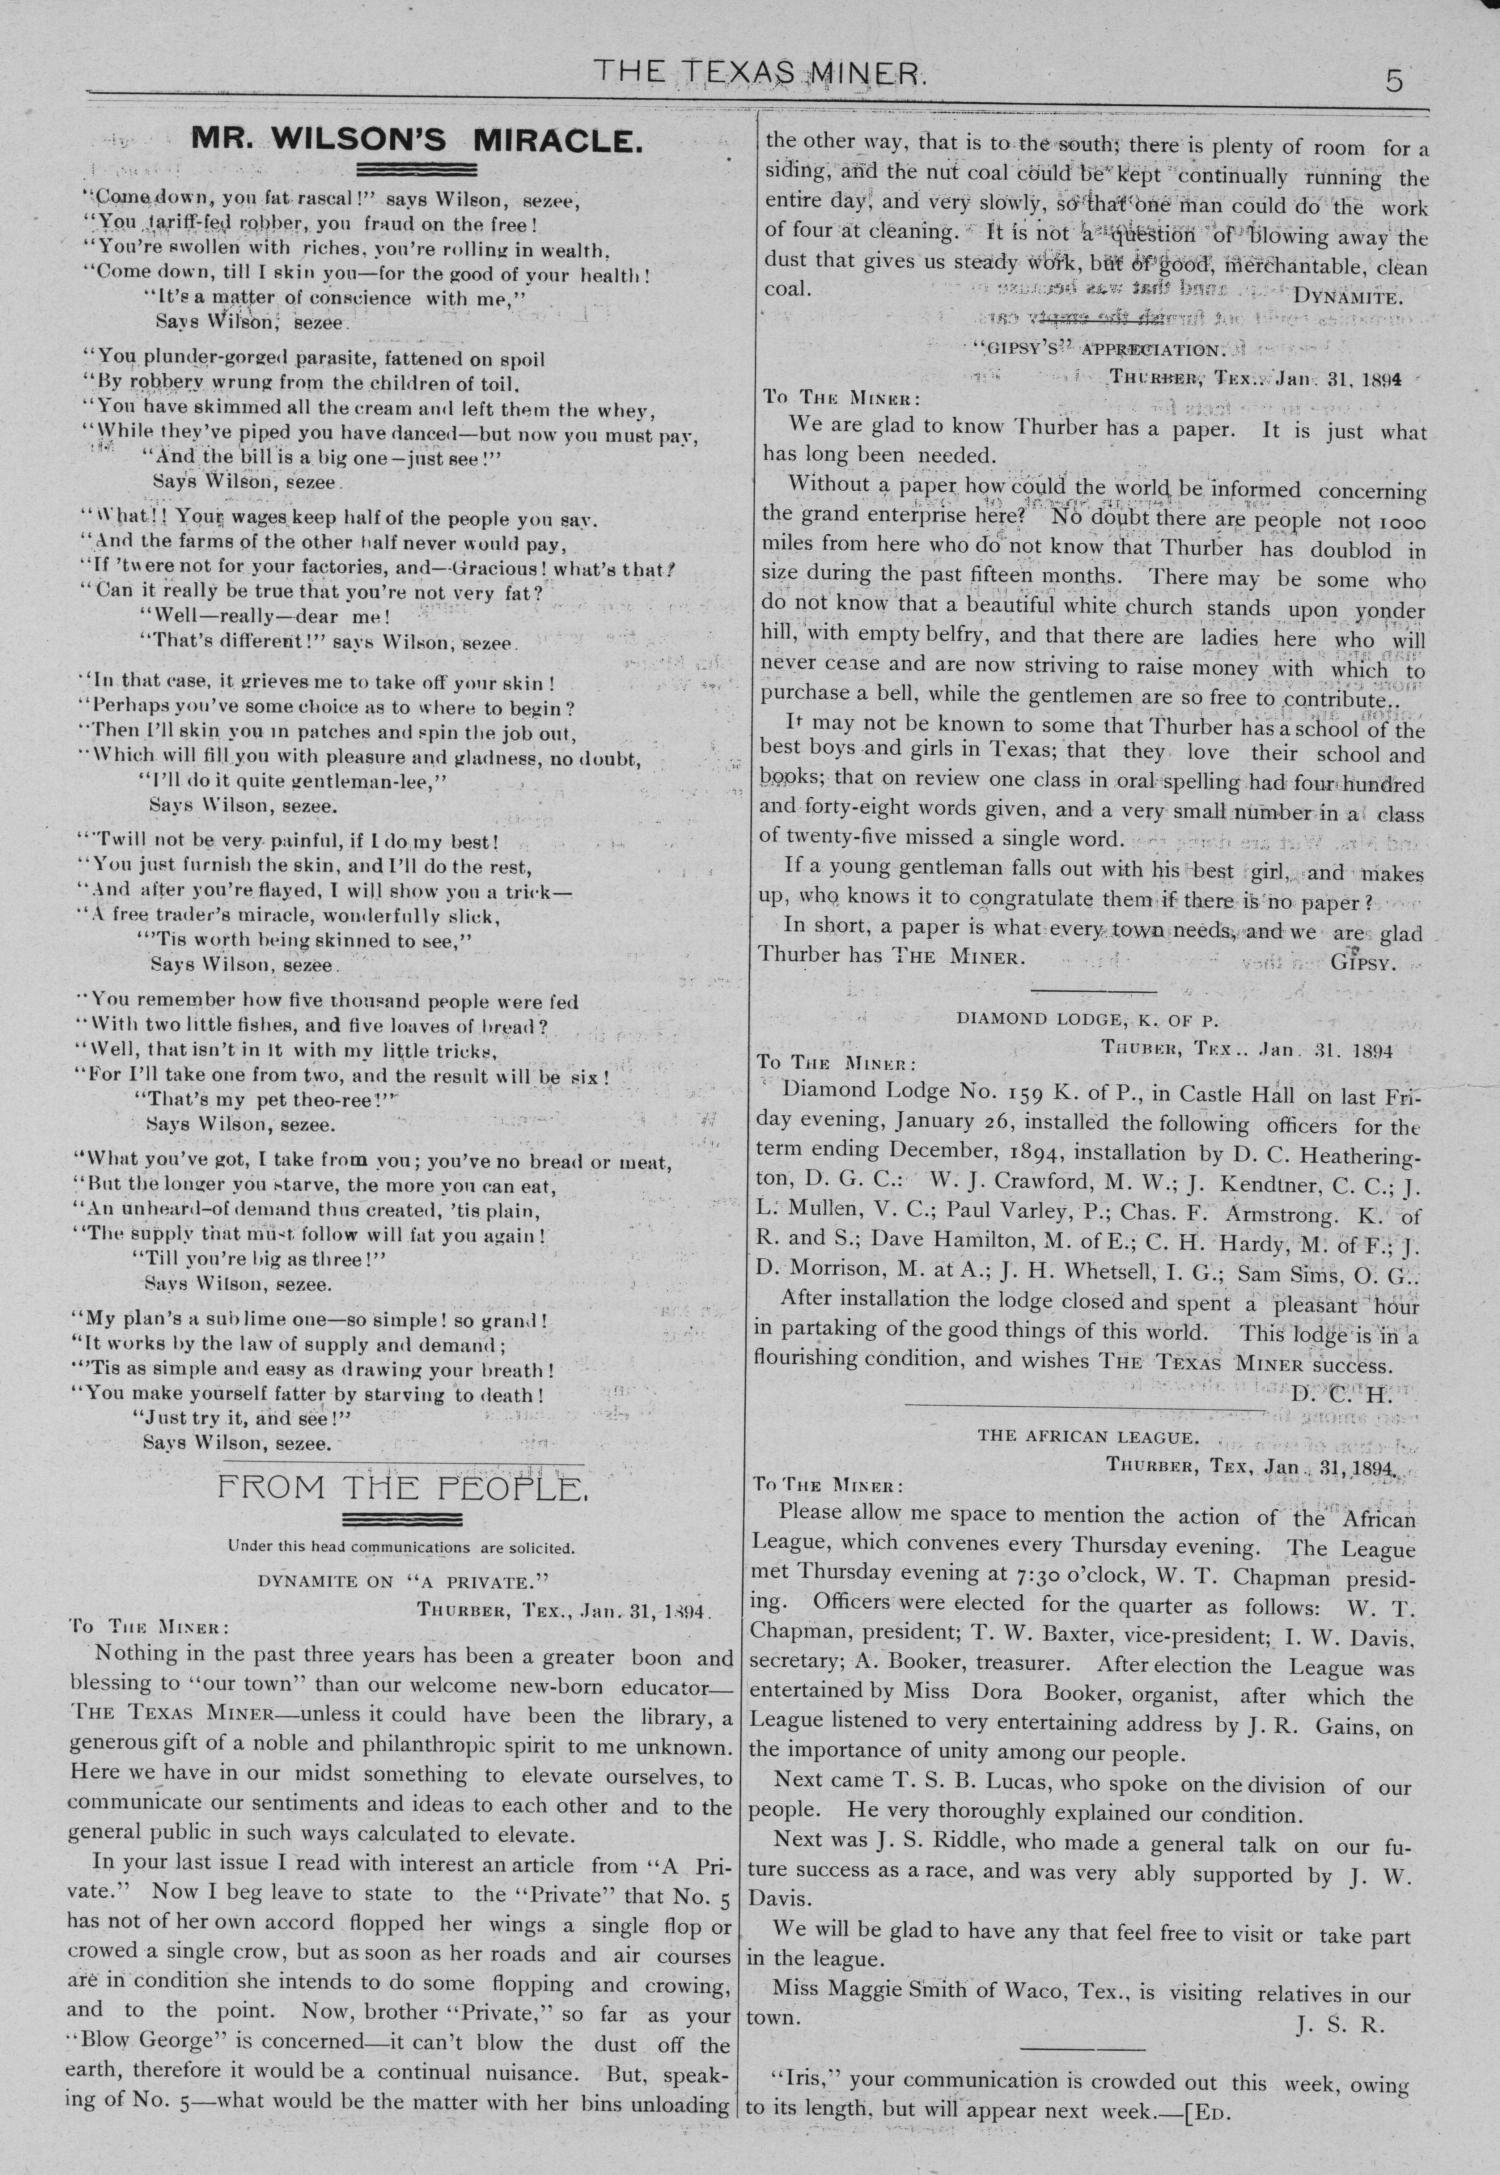 The Texas Miner, Volume 1, Number 3, February 3, 1894
                                                
                                                    5
                                                